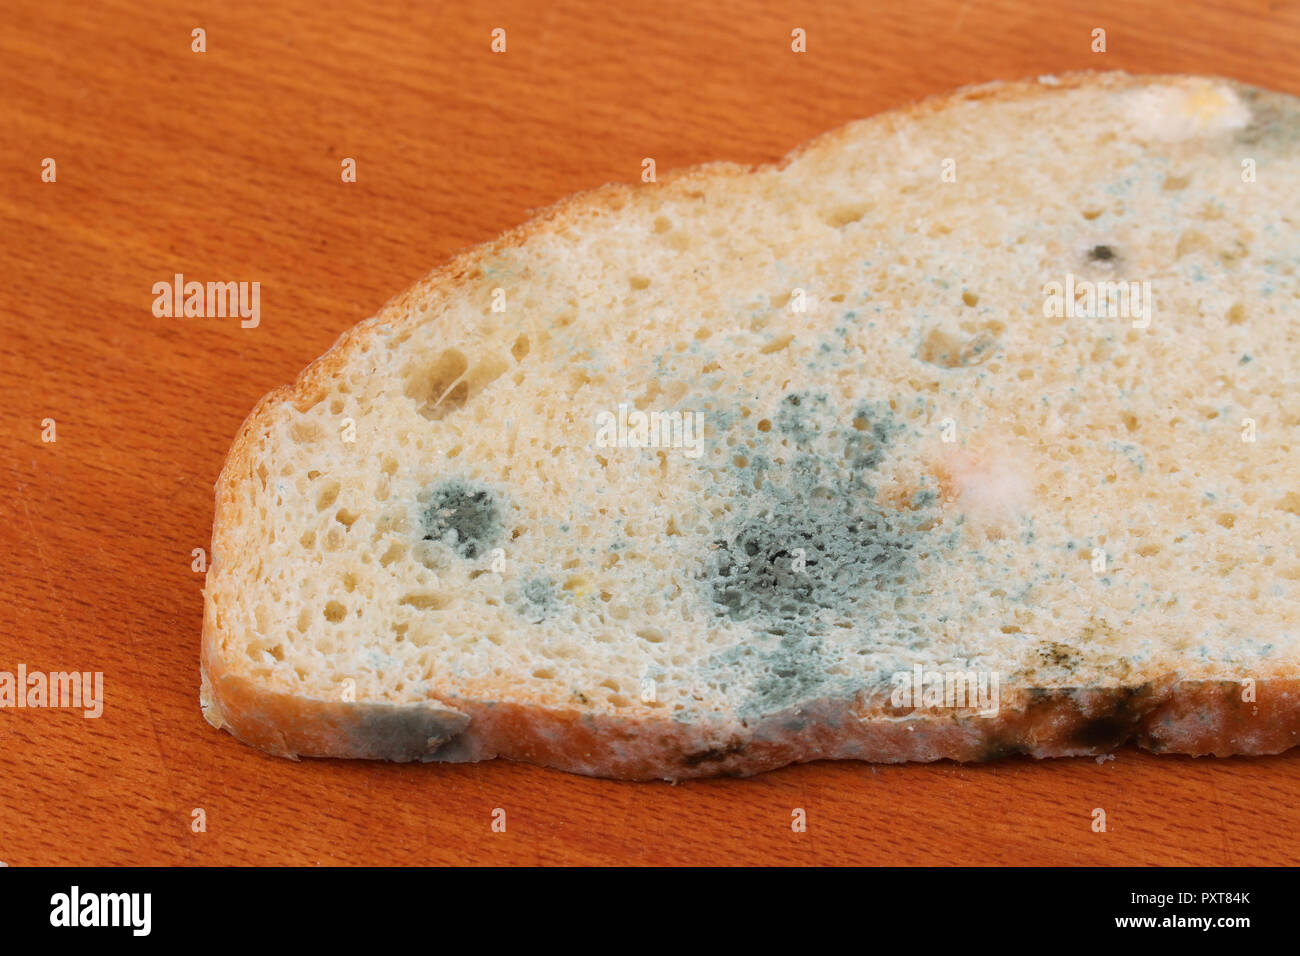 The Old White Mold On The Bread Spoiled Food Mold On Food Stock Photo Alamy,Cornish Pasty Recipe